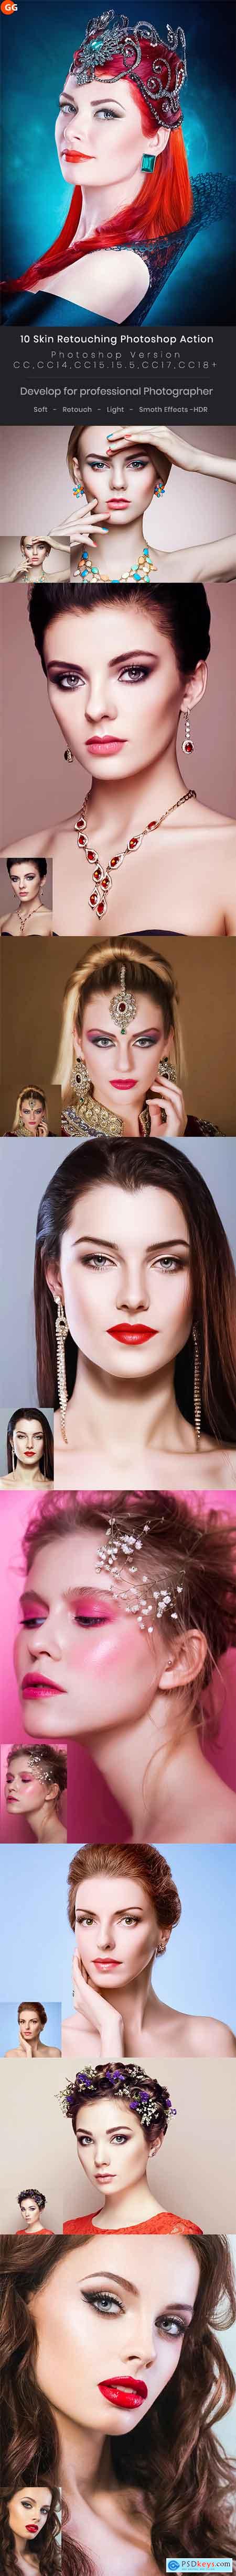 GraphicRiver 10 Skin Retouching Photoshop Action